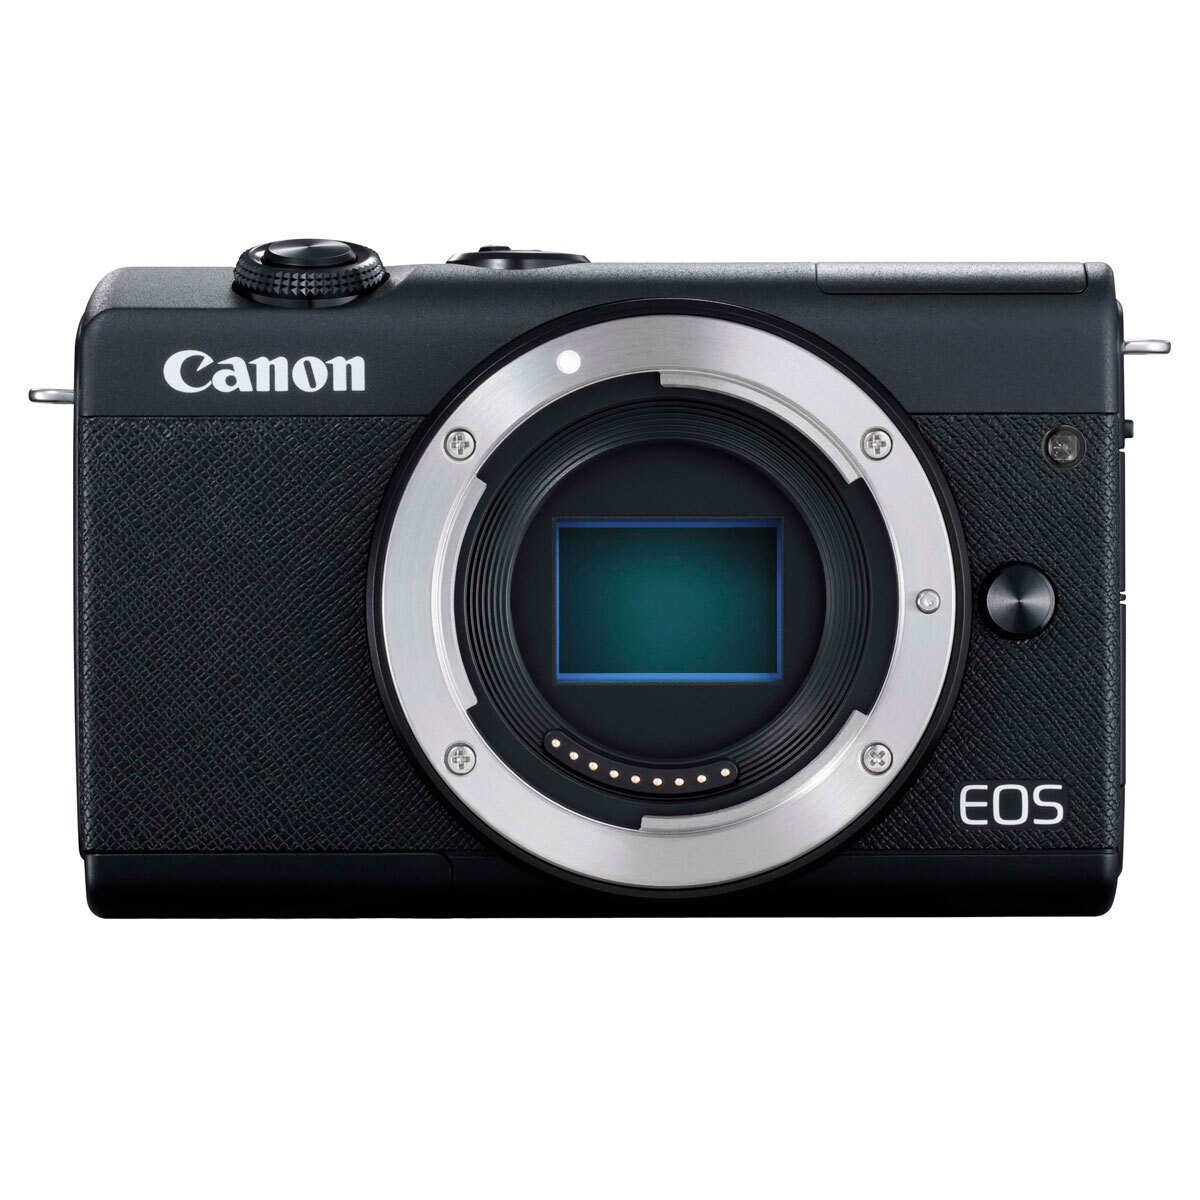 Buy Canon EOS M200 Mirrorless Camera, EF-M 15-45mm lens, Extra Battery and 16GB SD Card Costco.co.uk